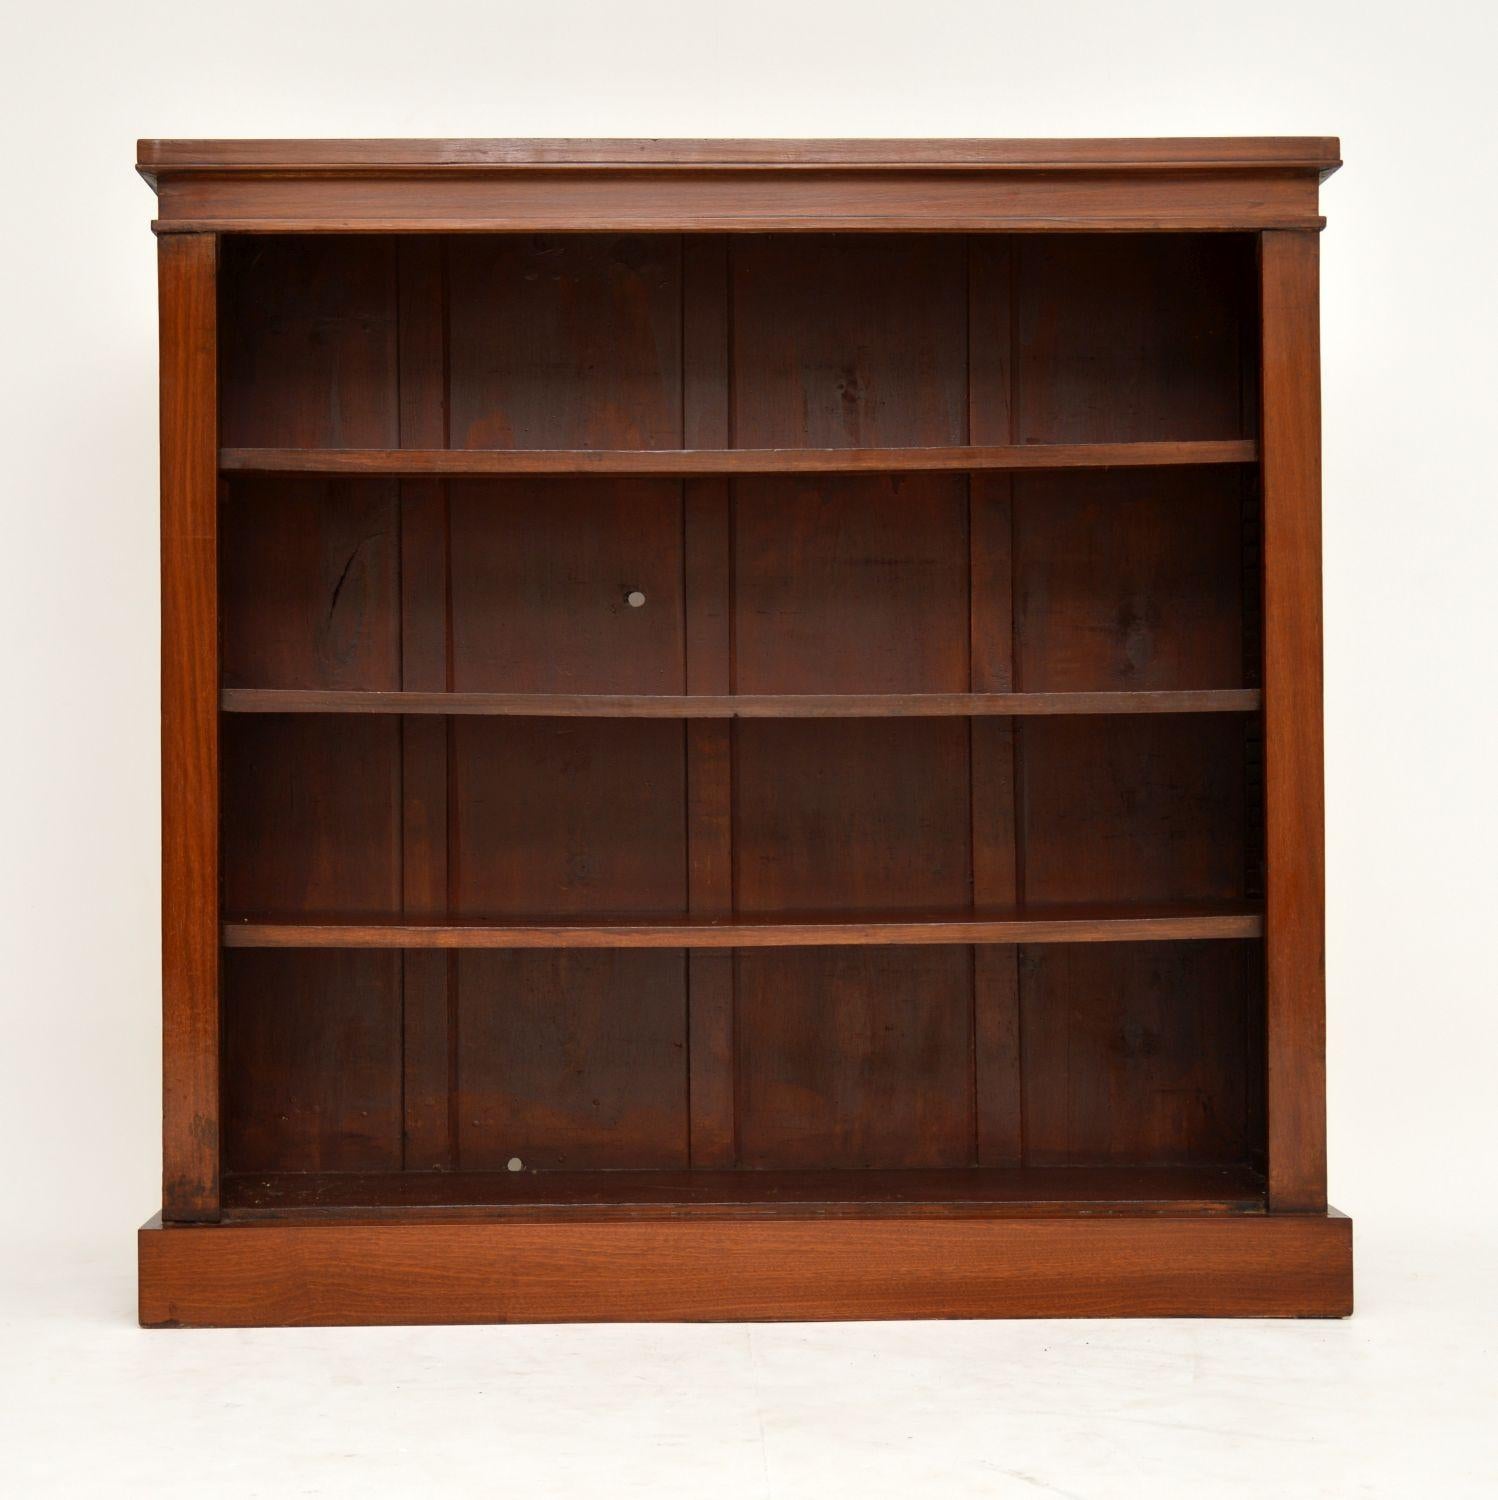 Antique Victorian mahogany open bookcase dating from circa 1880s and in good condition. It has three adjustable shelves and sits on a plinth base.

Measures: Width 48 inches, 122 cm
Depth 12 inches, 30 cm
Height 47 inches, 119 cm.